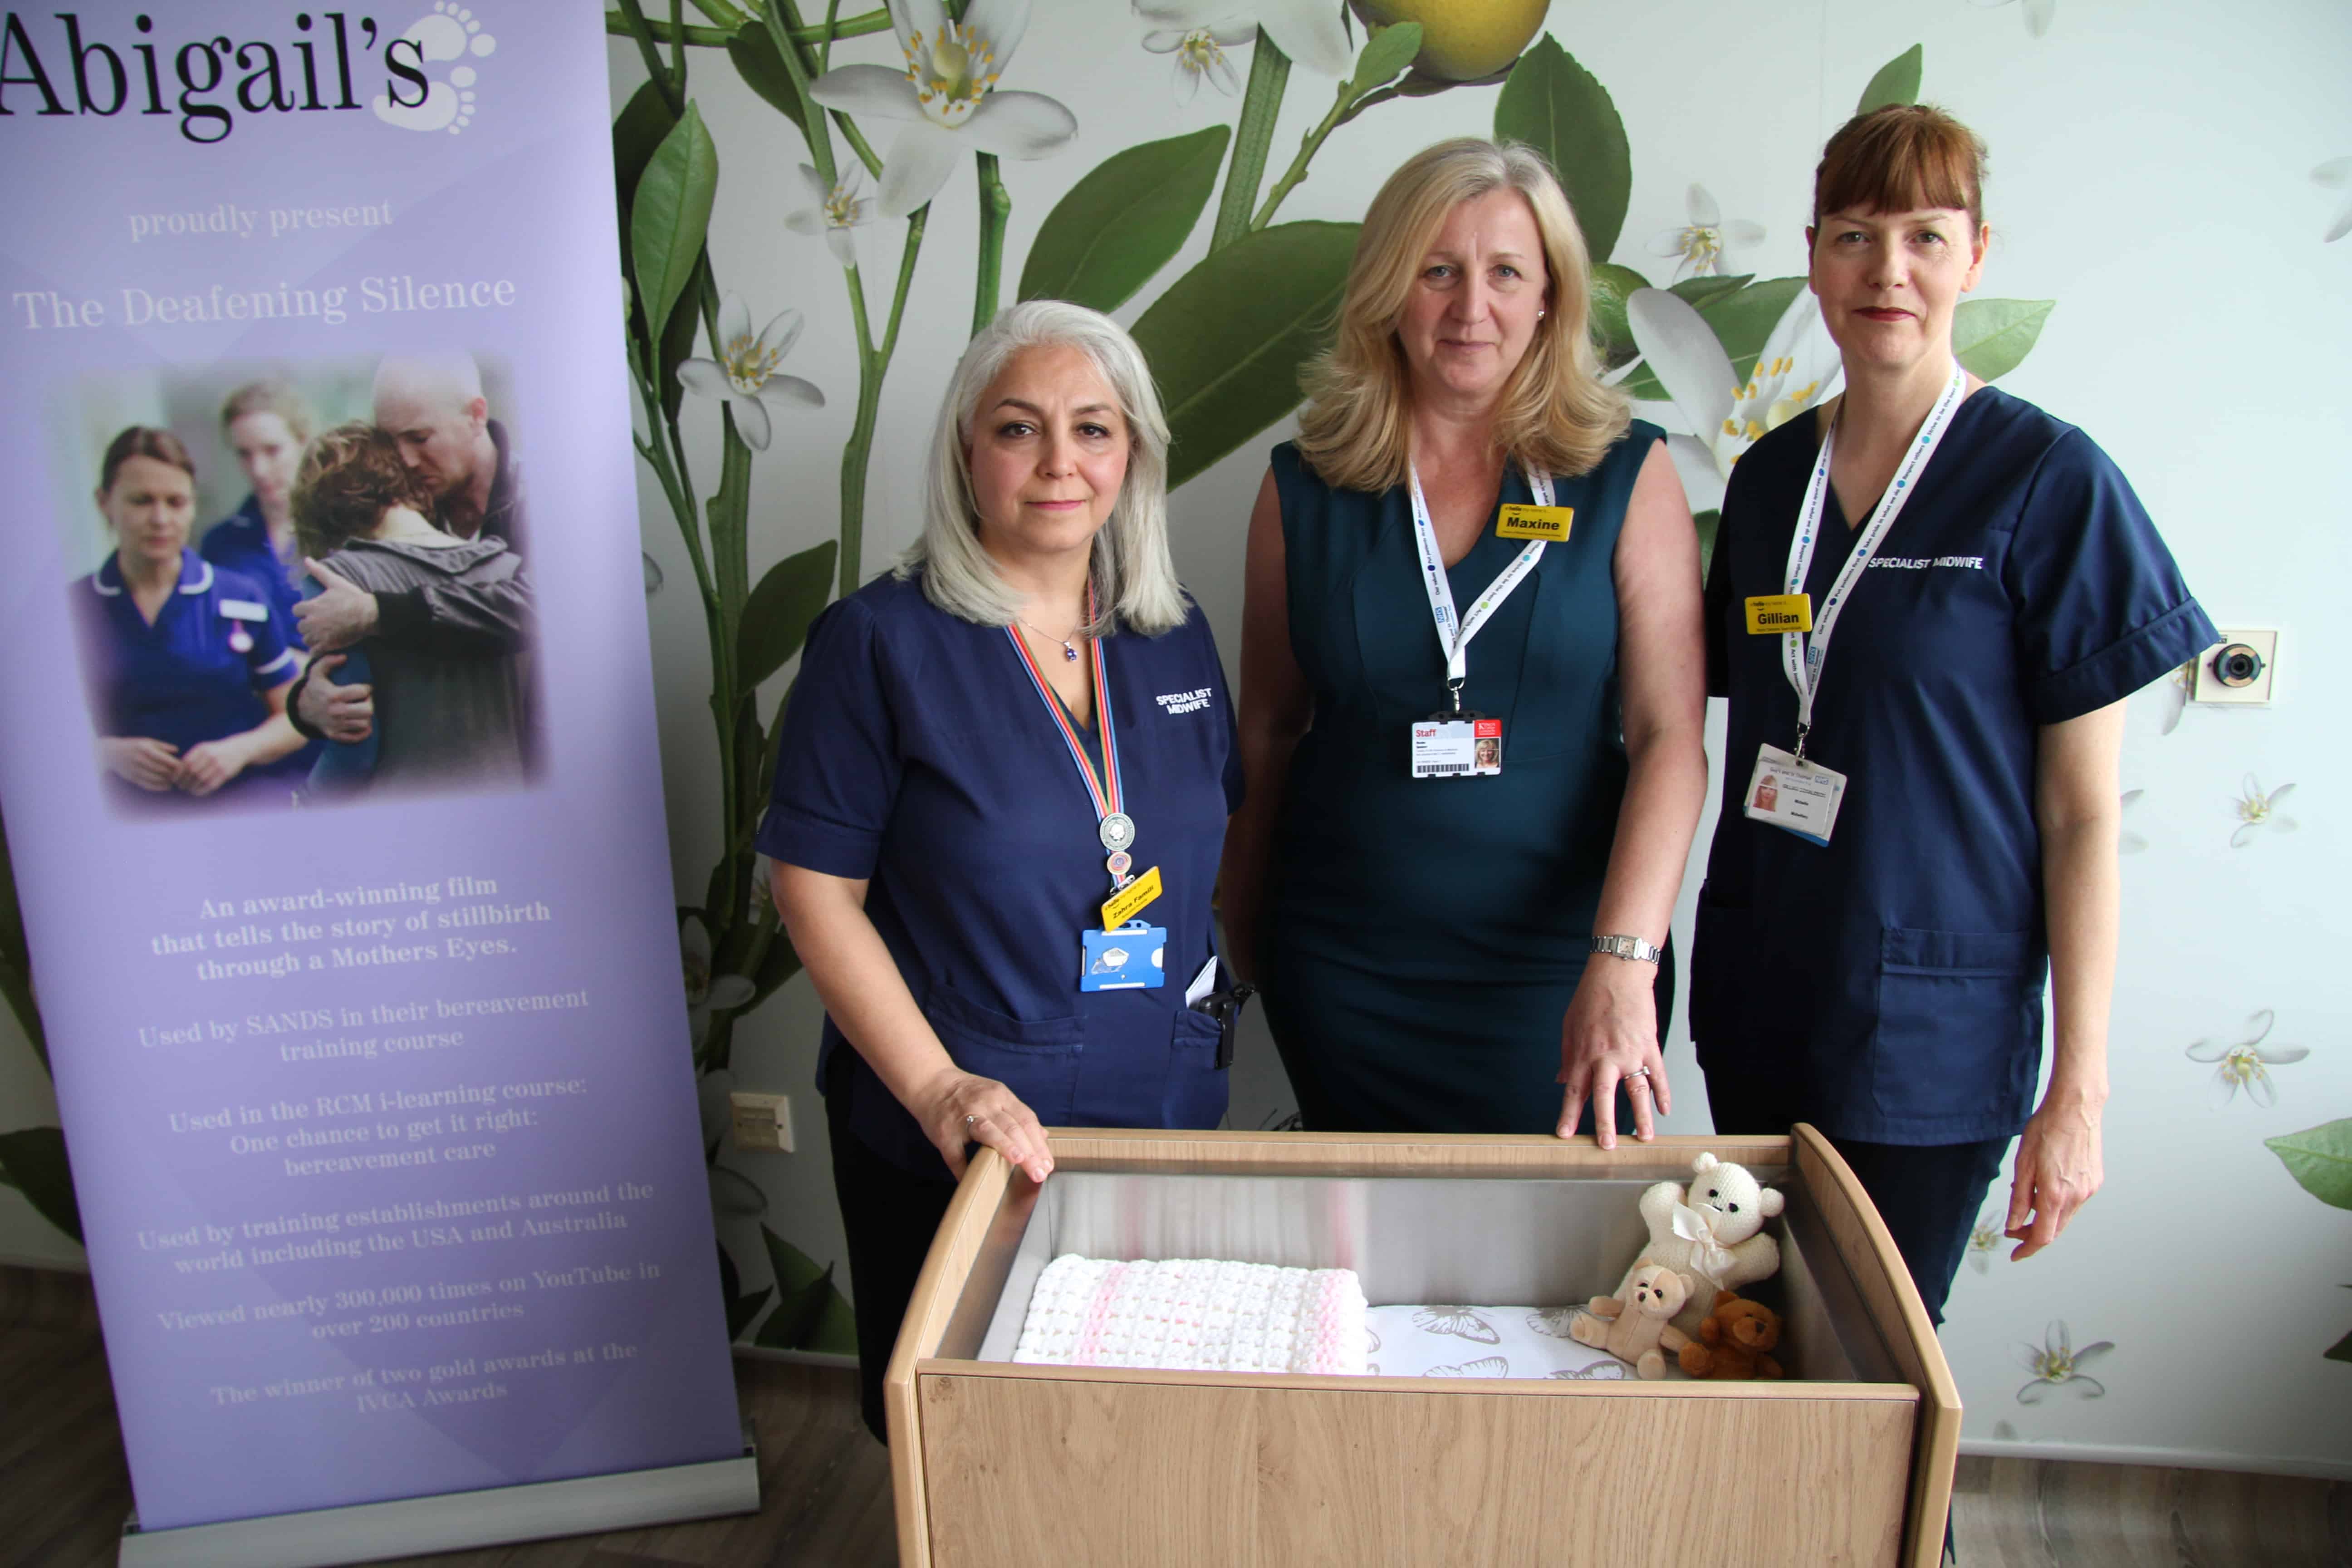 The cots were donated to St Thomas's by families who have experienced the tragedy of stillbirth